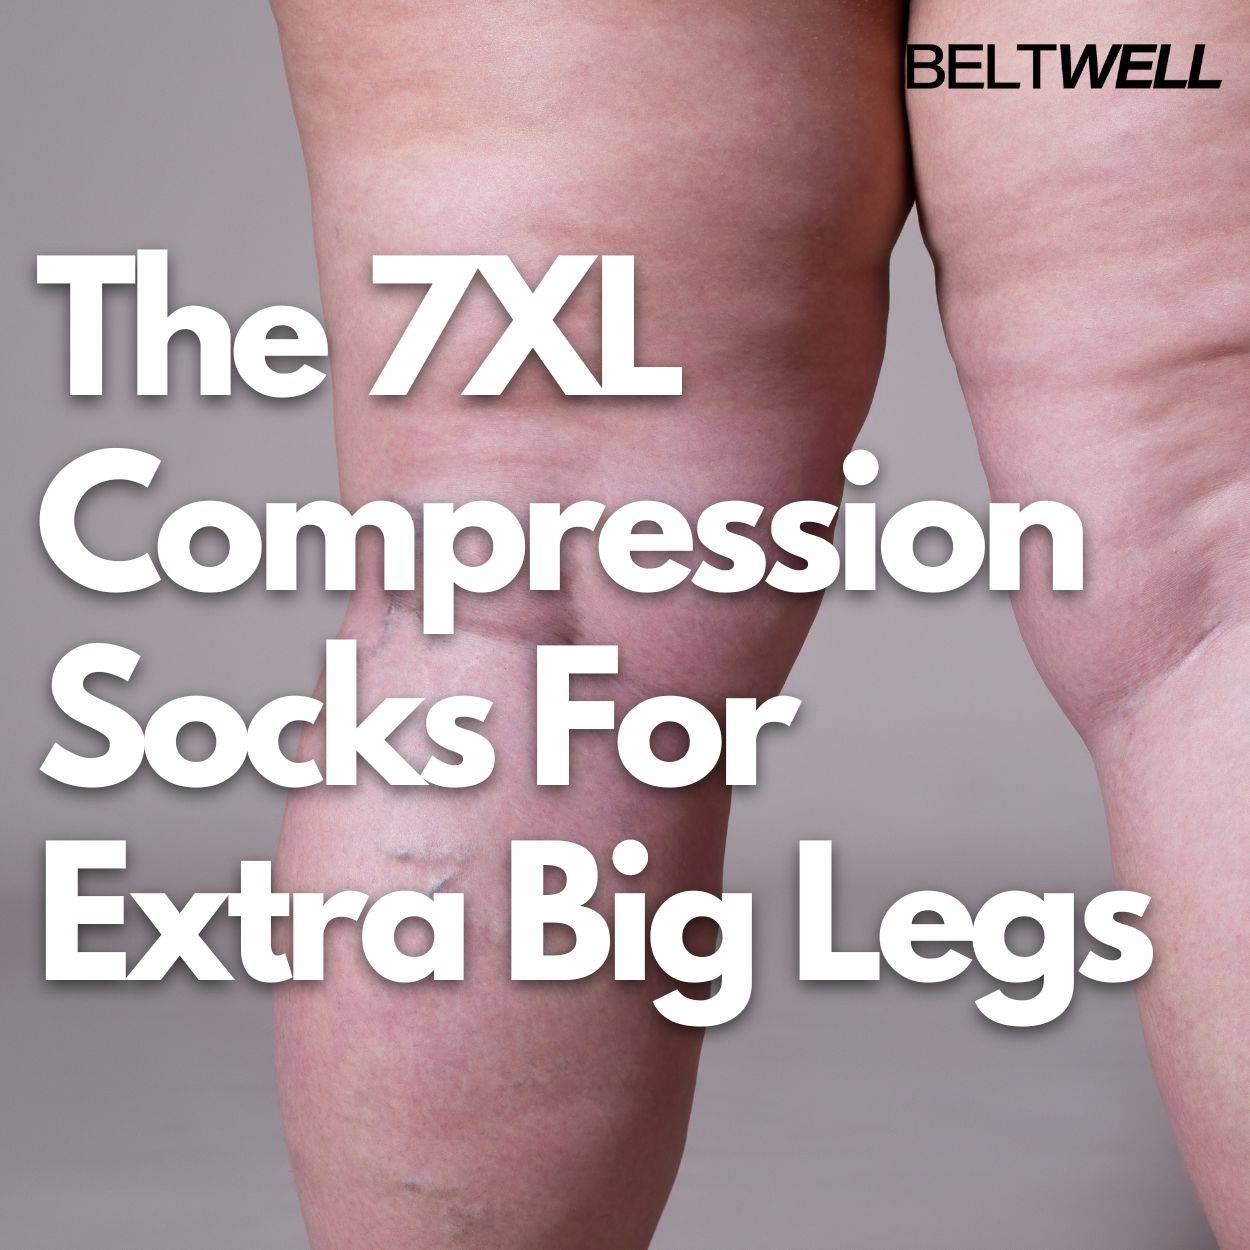 Beltwell™ - The 7XL Compression Socks For Extra Big Swollen Legs With